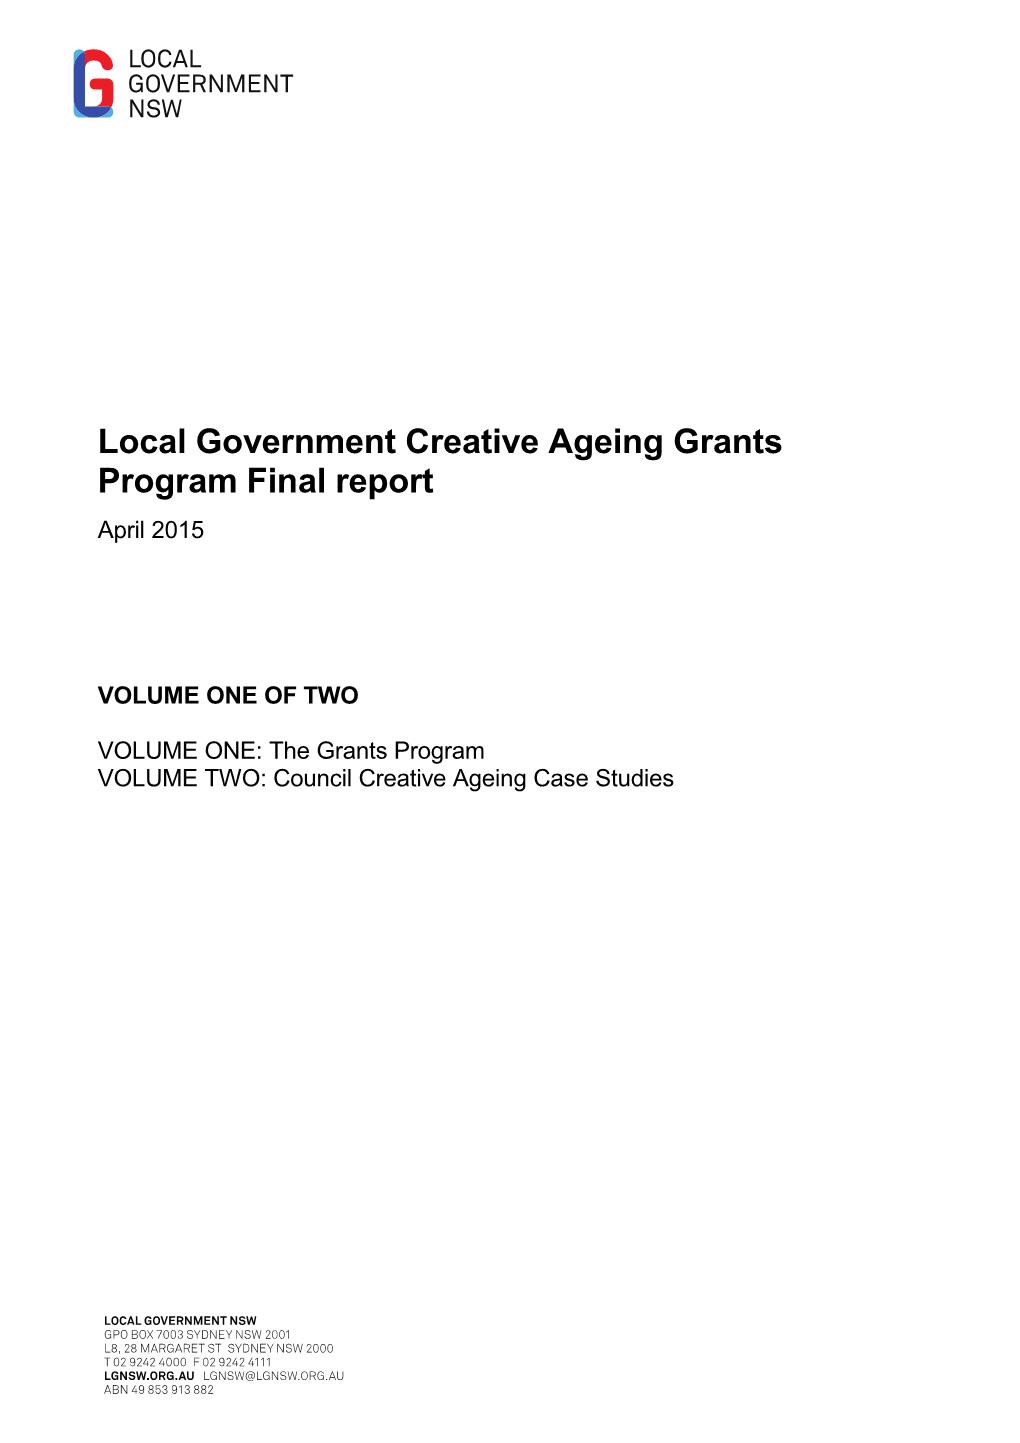 Local Government Creative Ageing Grants Program Final Report